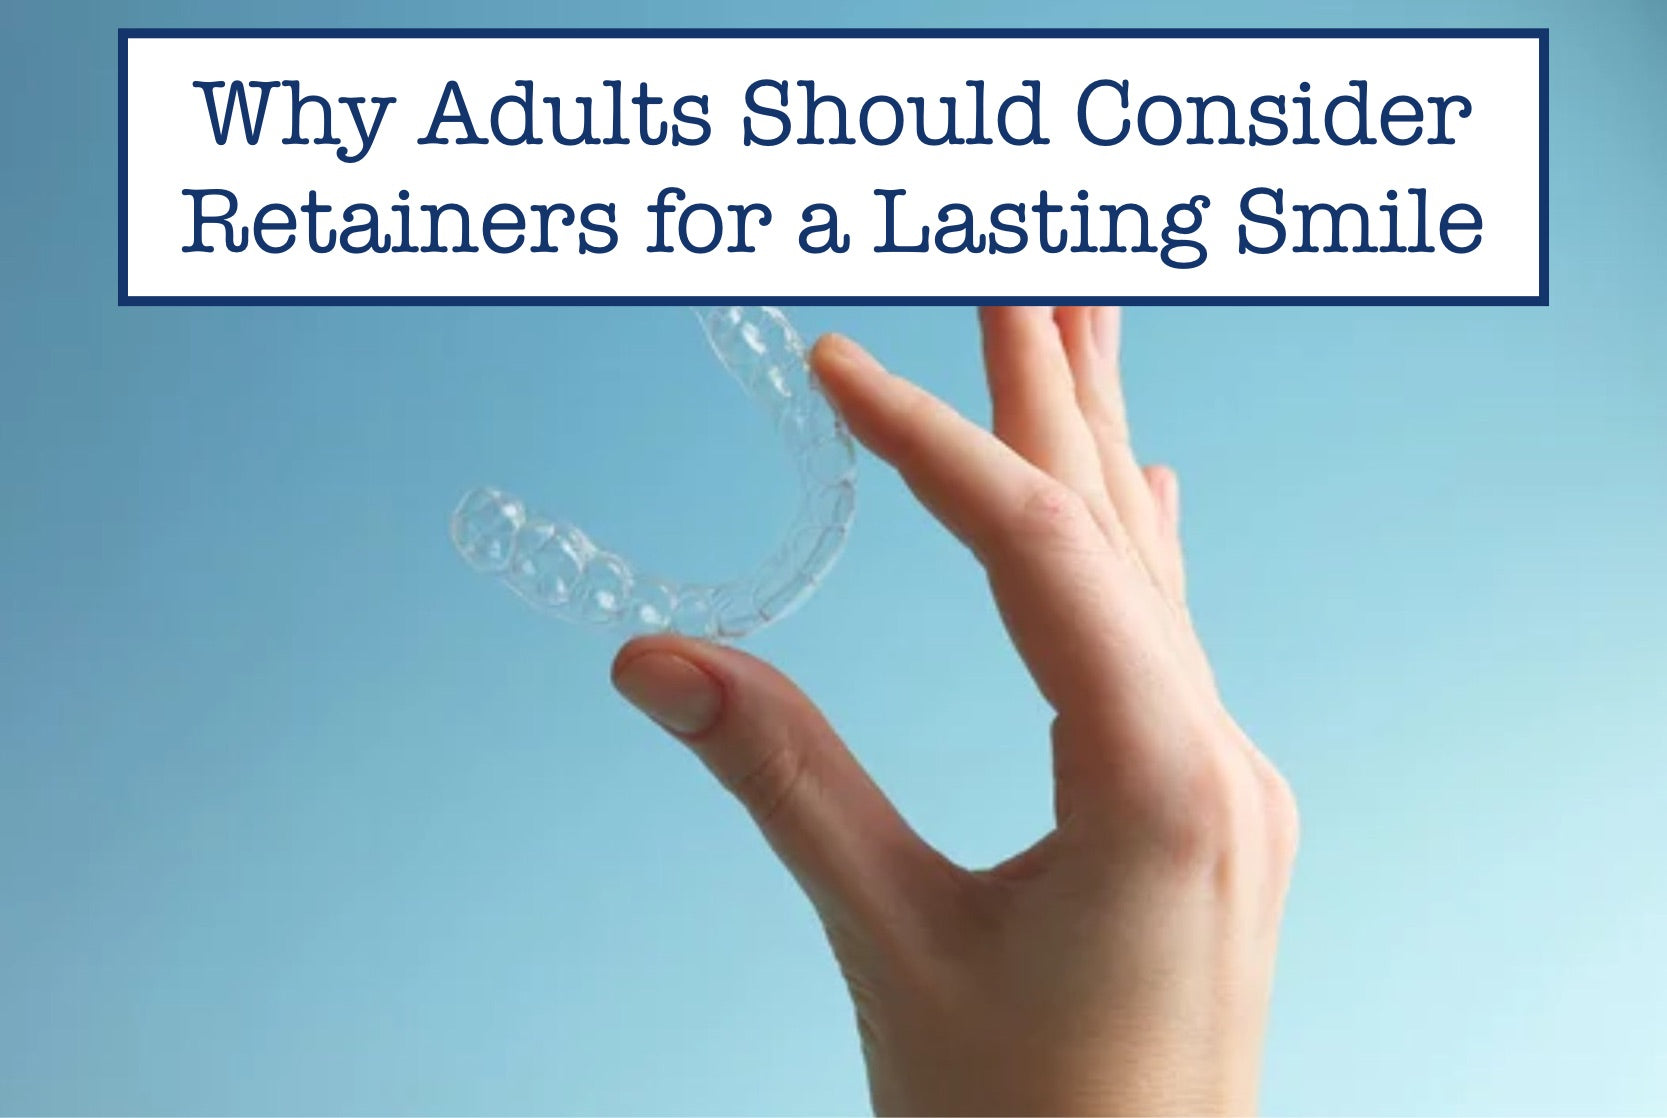 Why Adults Should Consider Retainers for a Lasting Smile